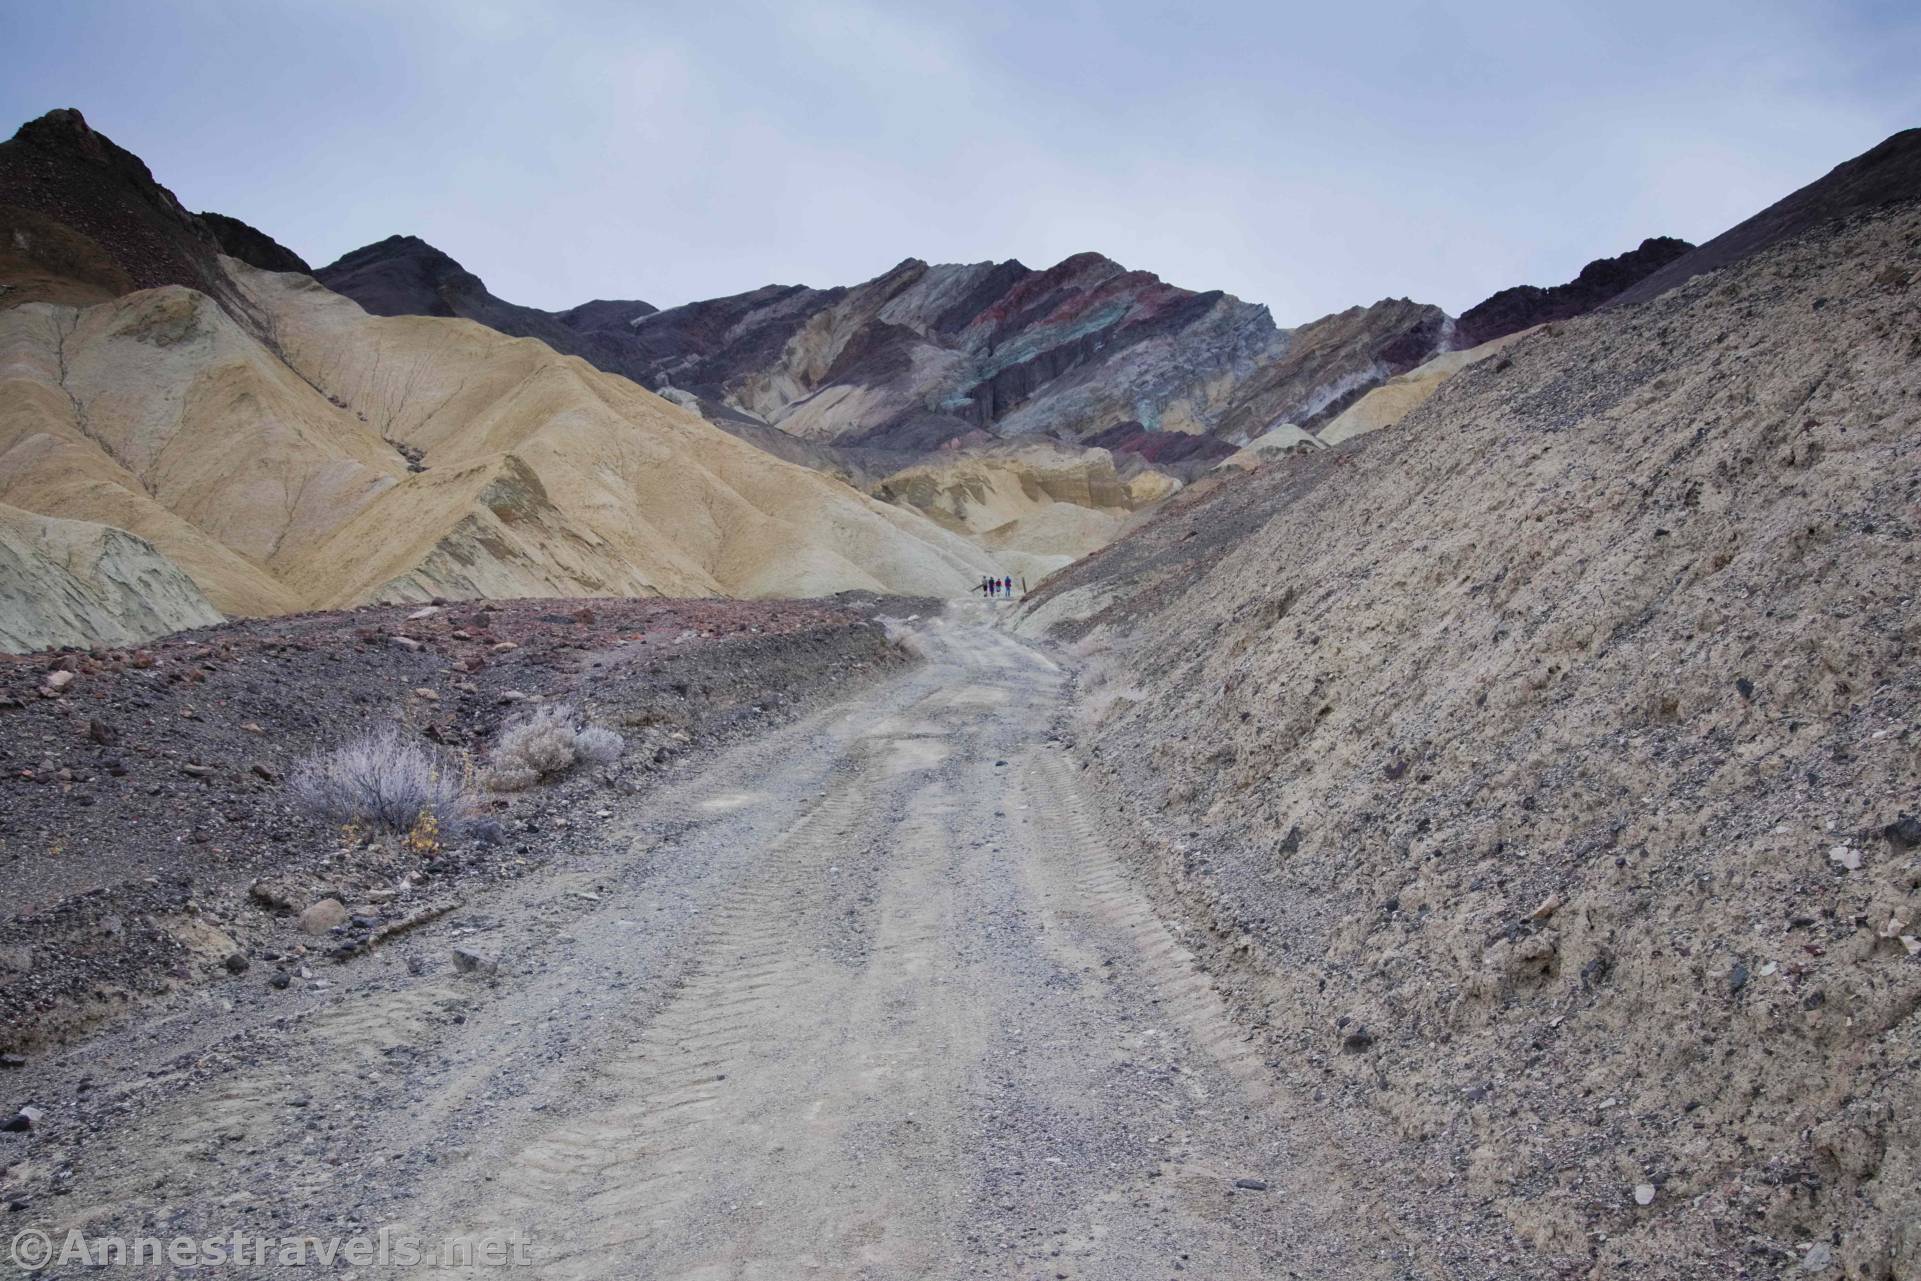 The road up Corkscrew Canyon, Death Valley National Park, California